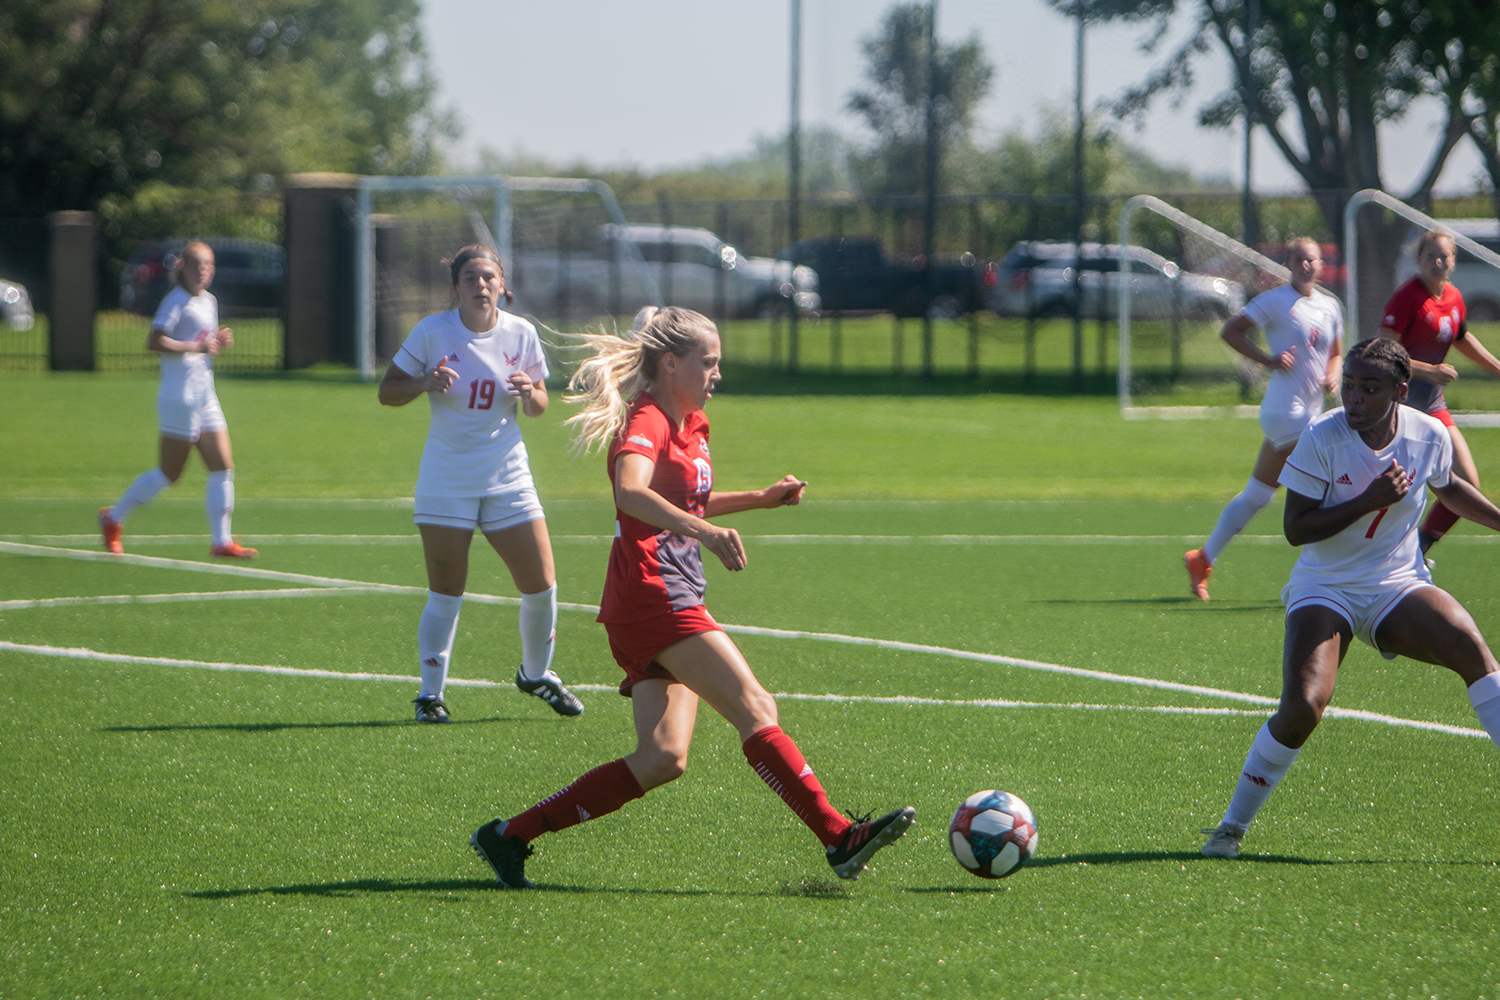 Late goal from Centineo snaps losing streak at Drake